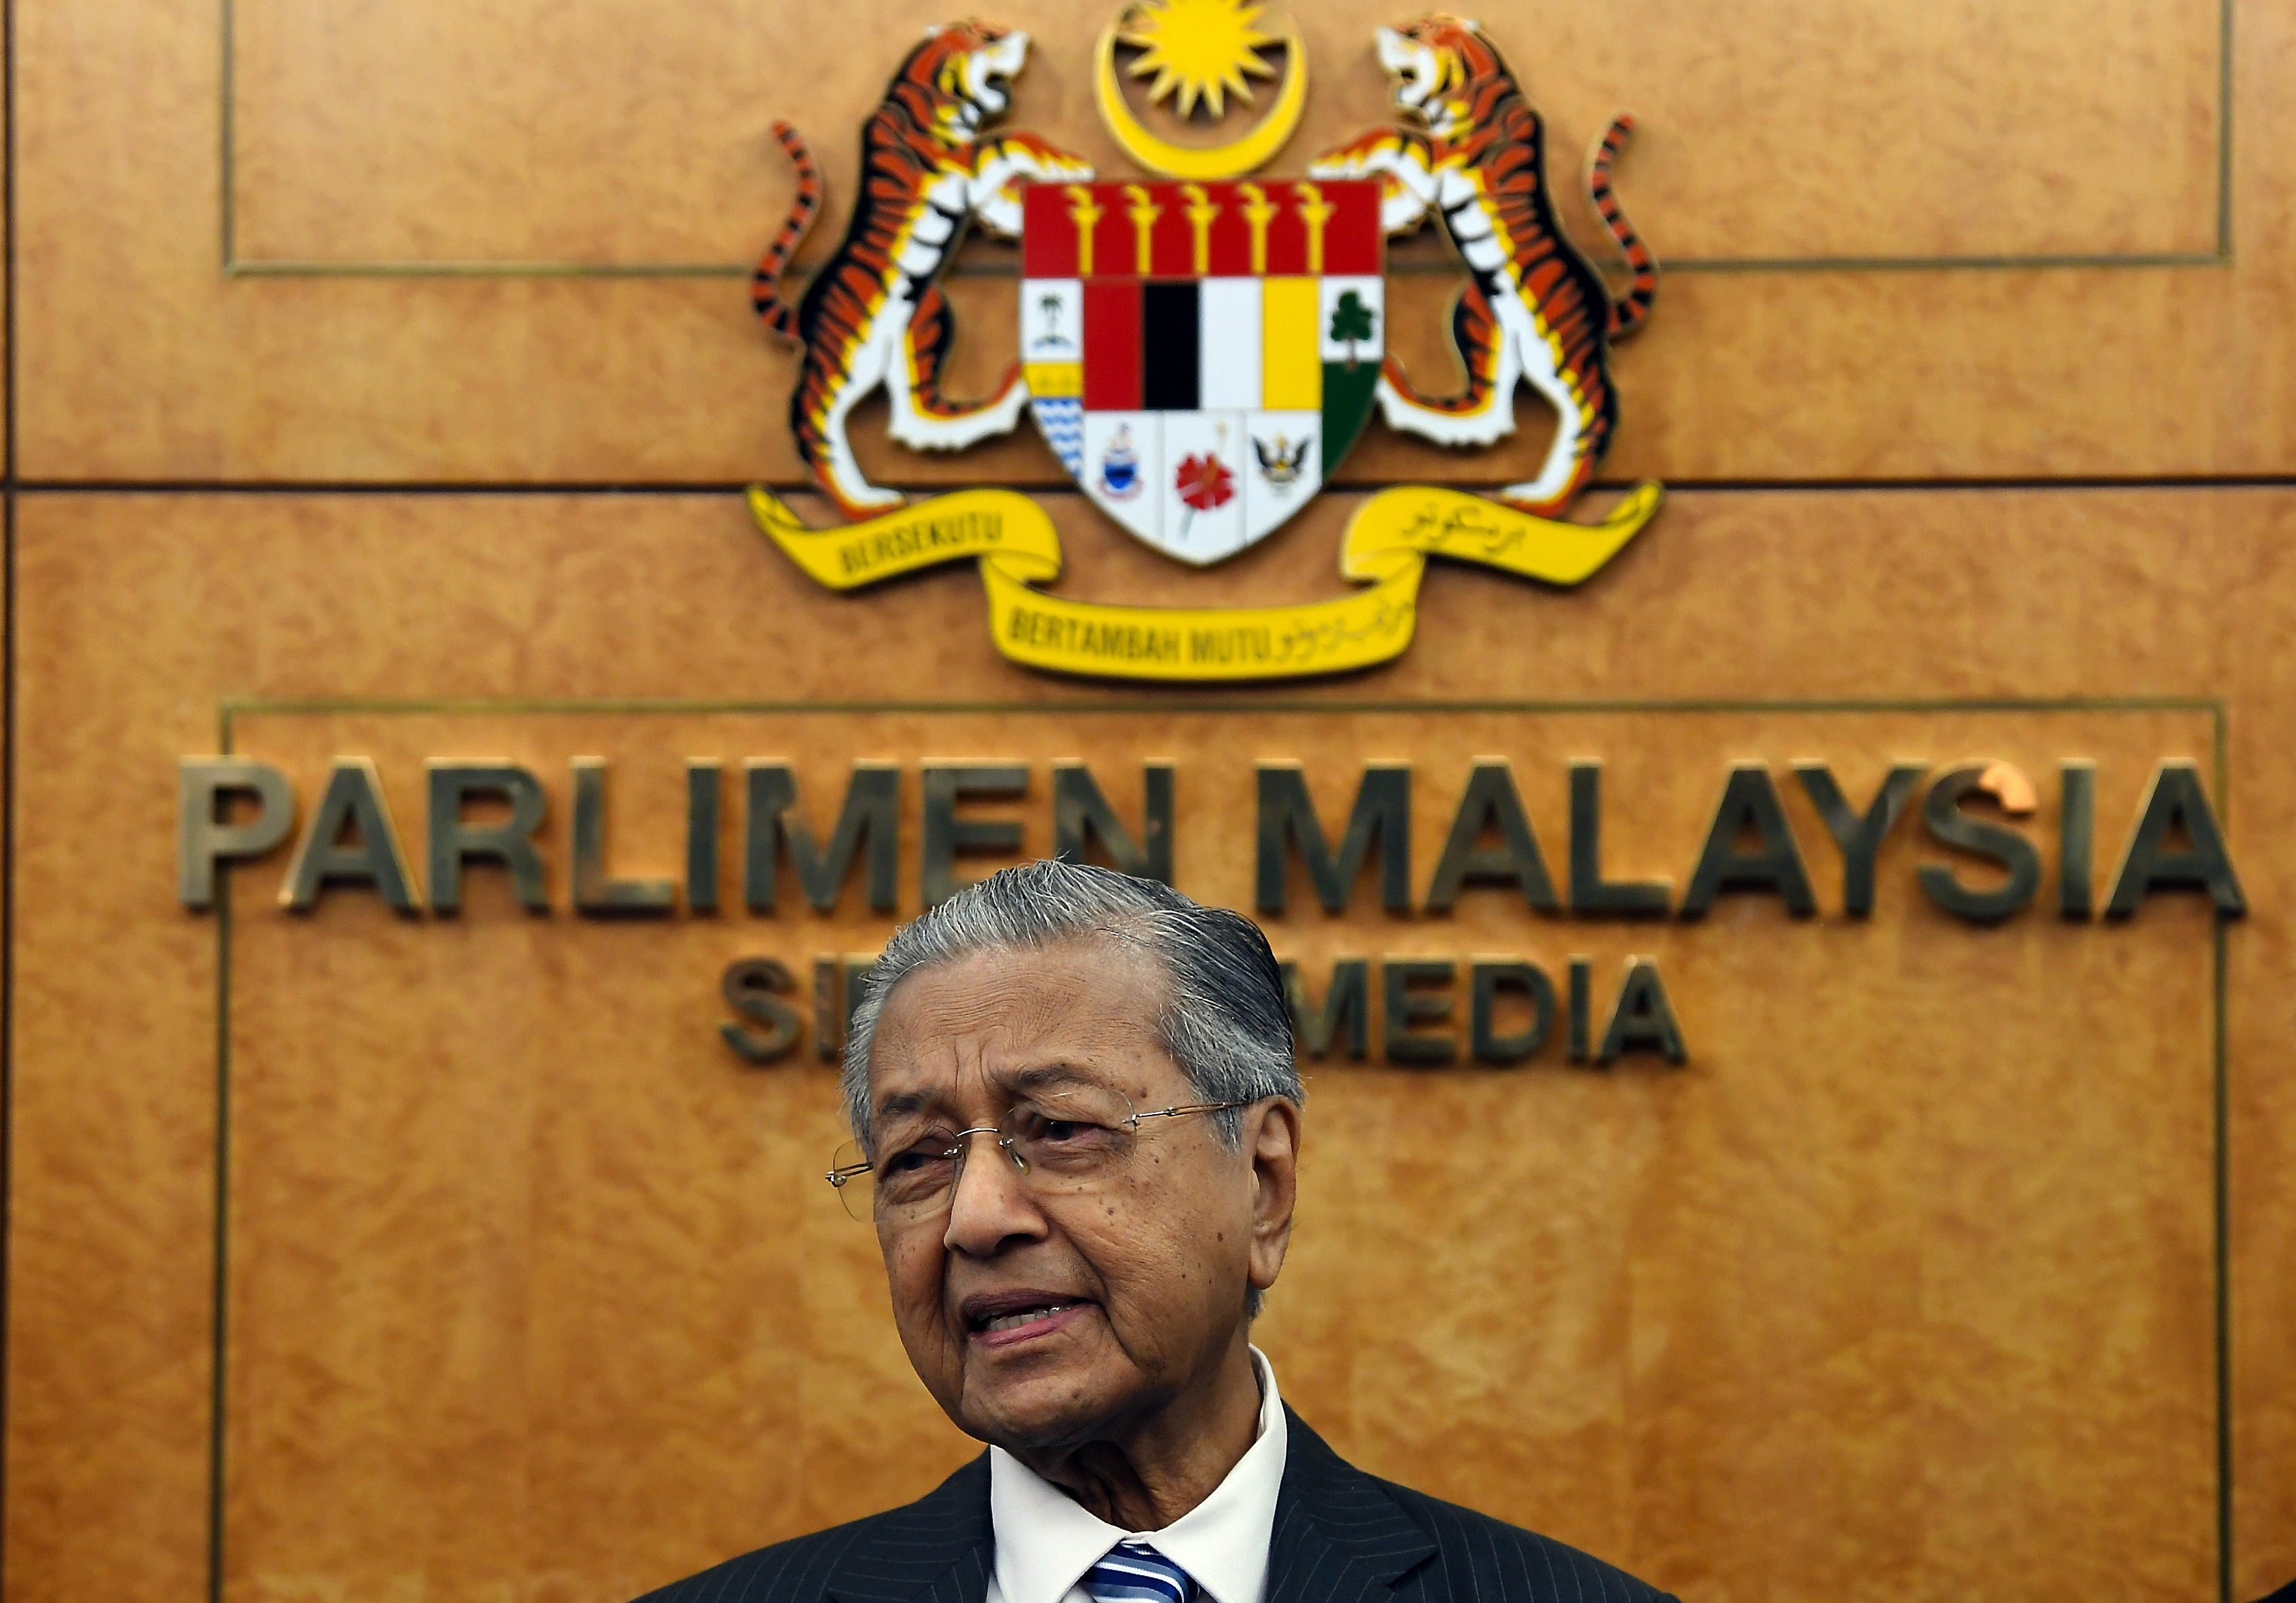 Malaysian Prime Minister Mahathir Mohamad speaks at a press conference after attending a parliament session in Kuala Lumpur on October 7. Photo: Nur Ain Shafinas/BERNAMA/dpa